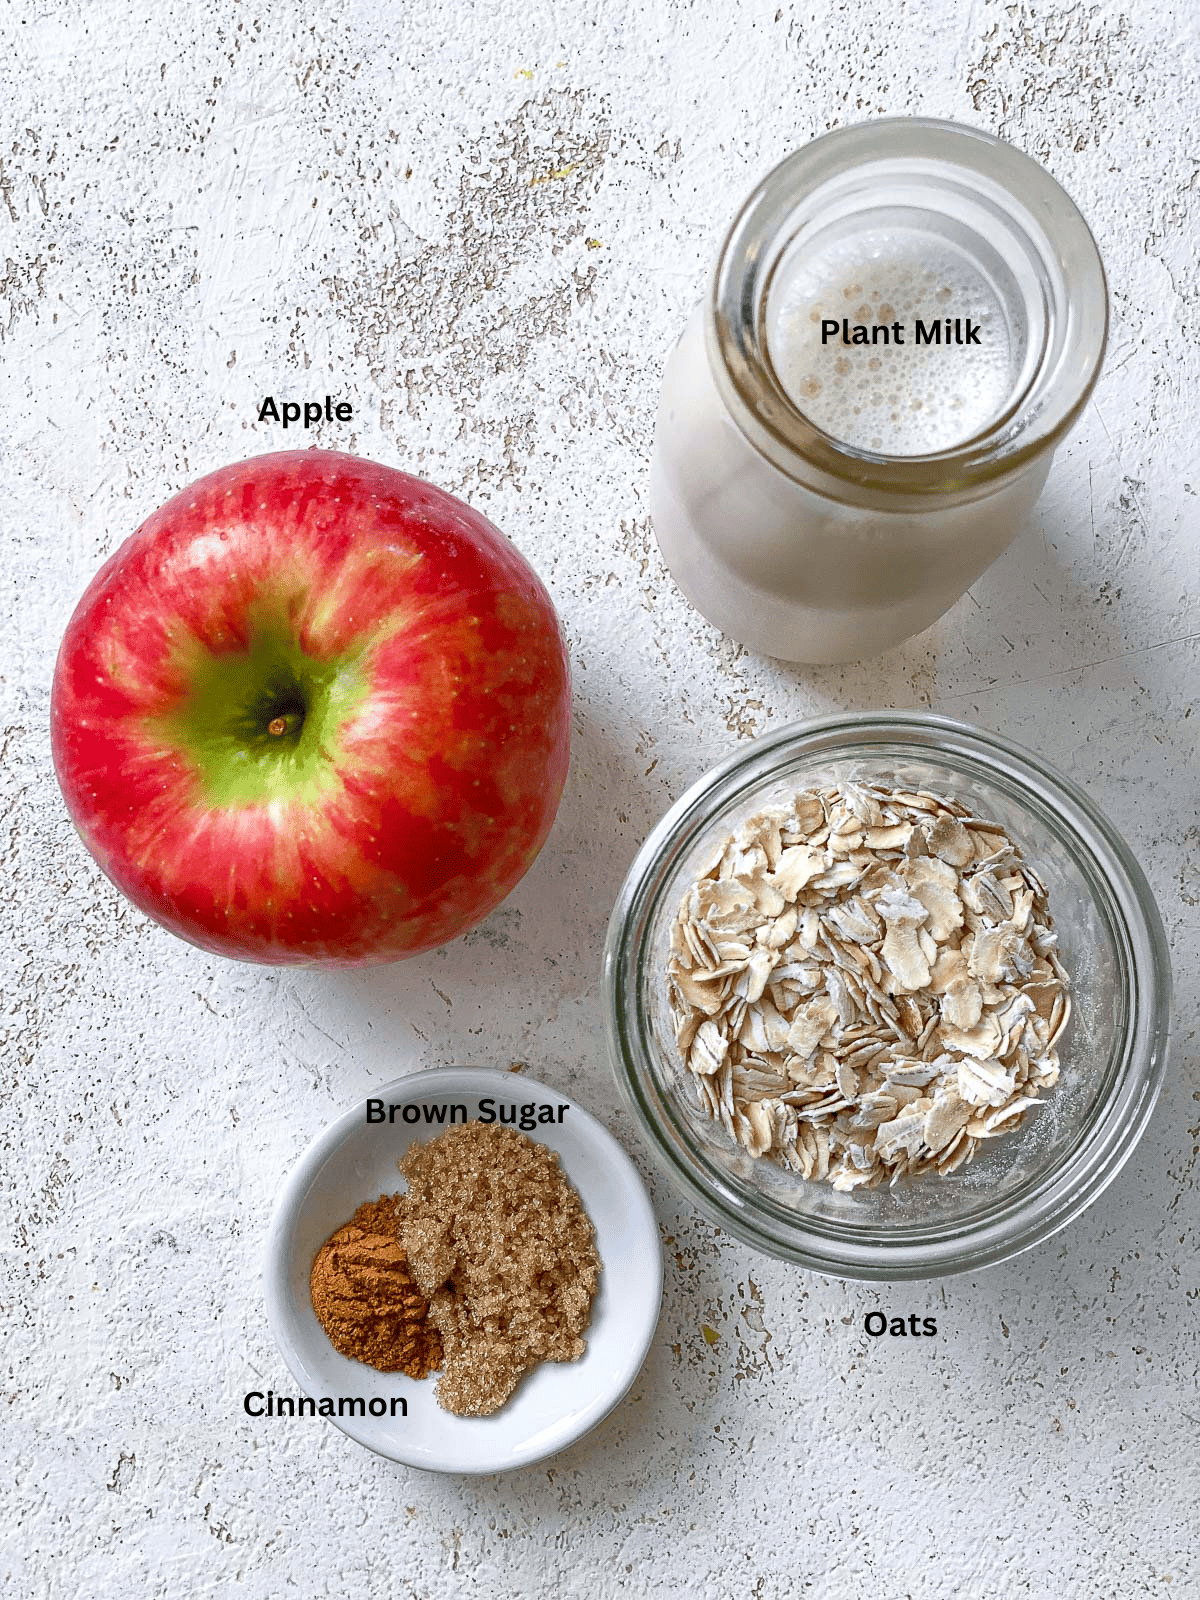 ingredients for Apple Cinnamon Overnight Oats measured out against a white surface